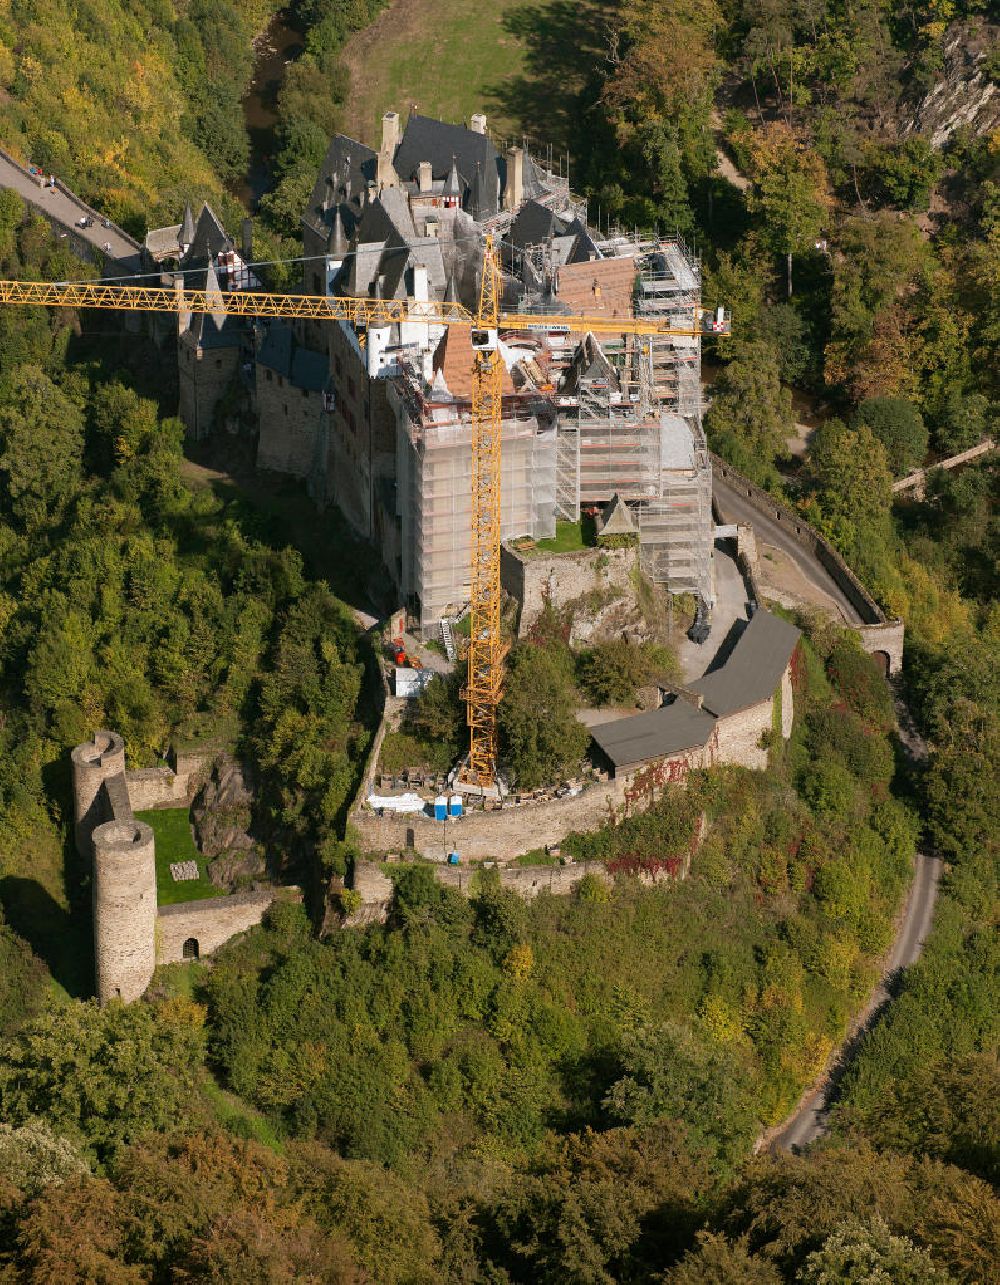 Wierschem from the bird's eye view: The Eltz Castle is located in the south of the local community Wierschem. The castle was probably built in the beginning of the 12th century. In autumn 2010, as part of an overall comprehensive redevelopment, the company Harald Handwerk GmbH Dachbau performed a roof restoration